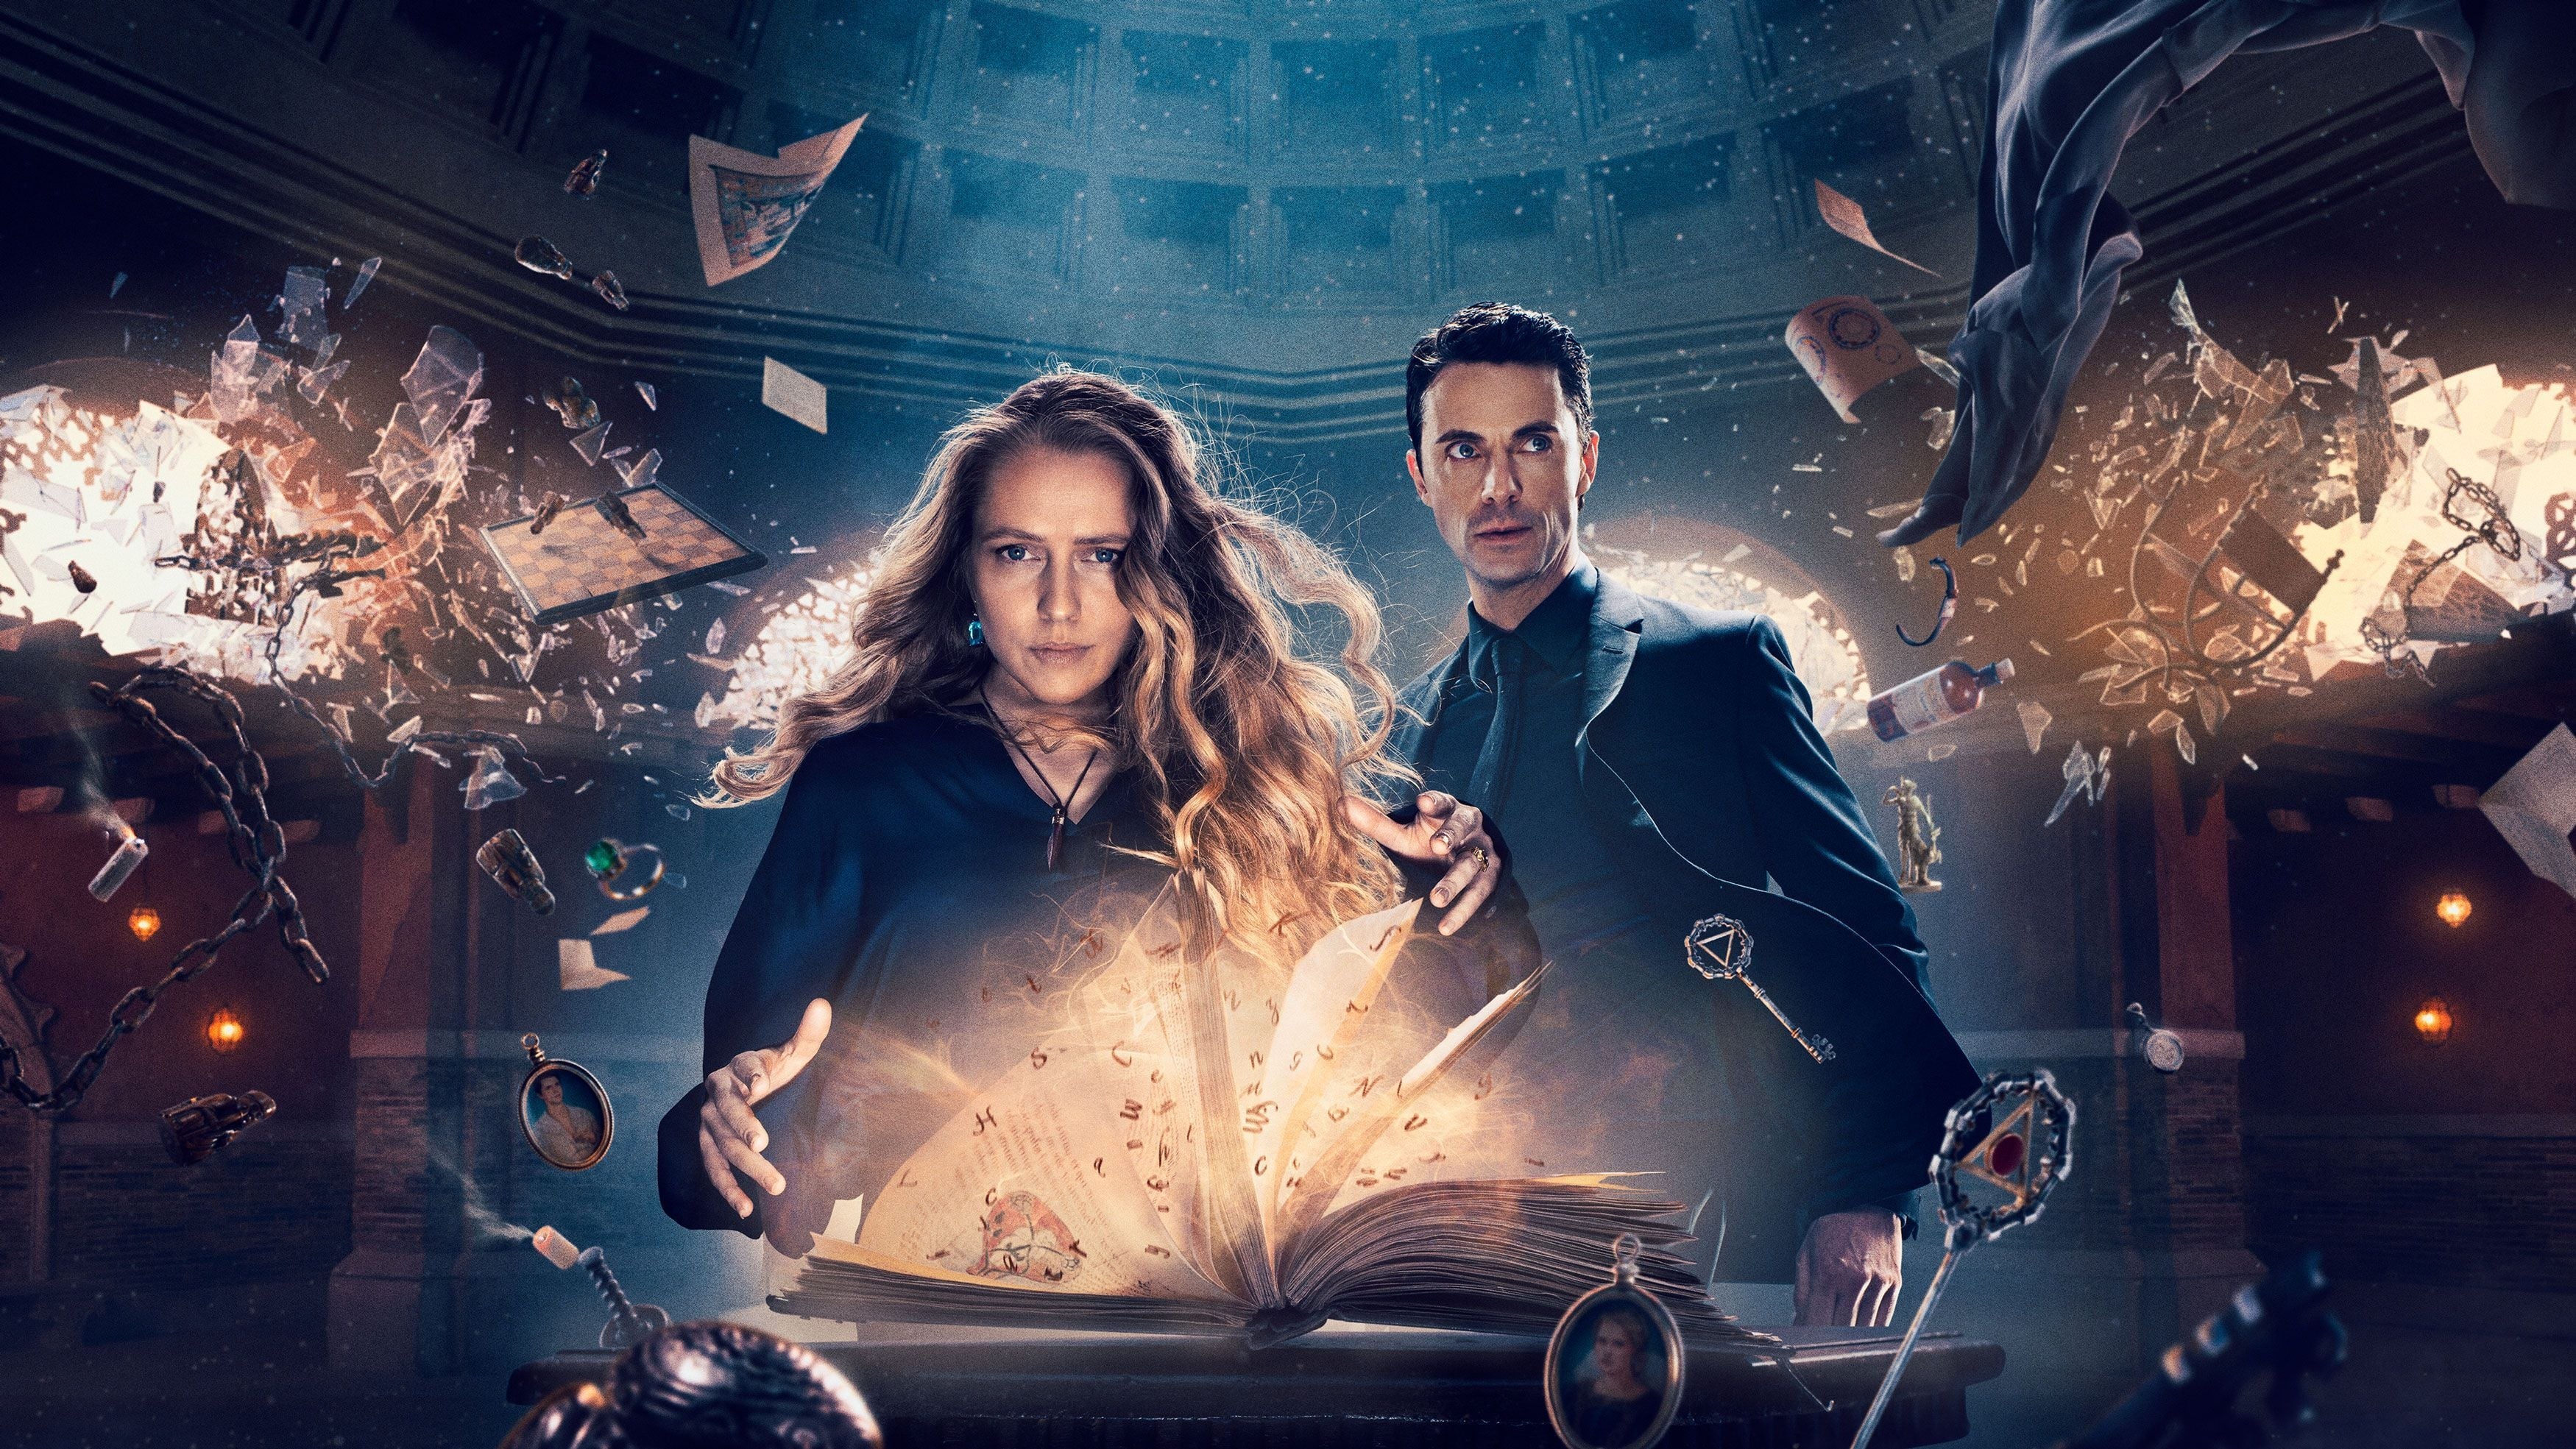 3. Staffel „A Discovery of Witches“ bei Sky